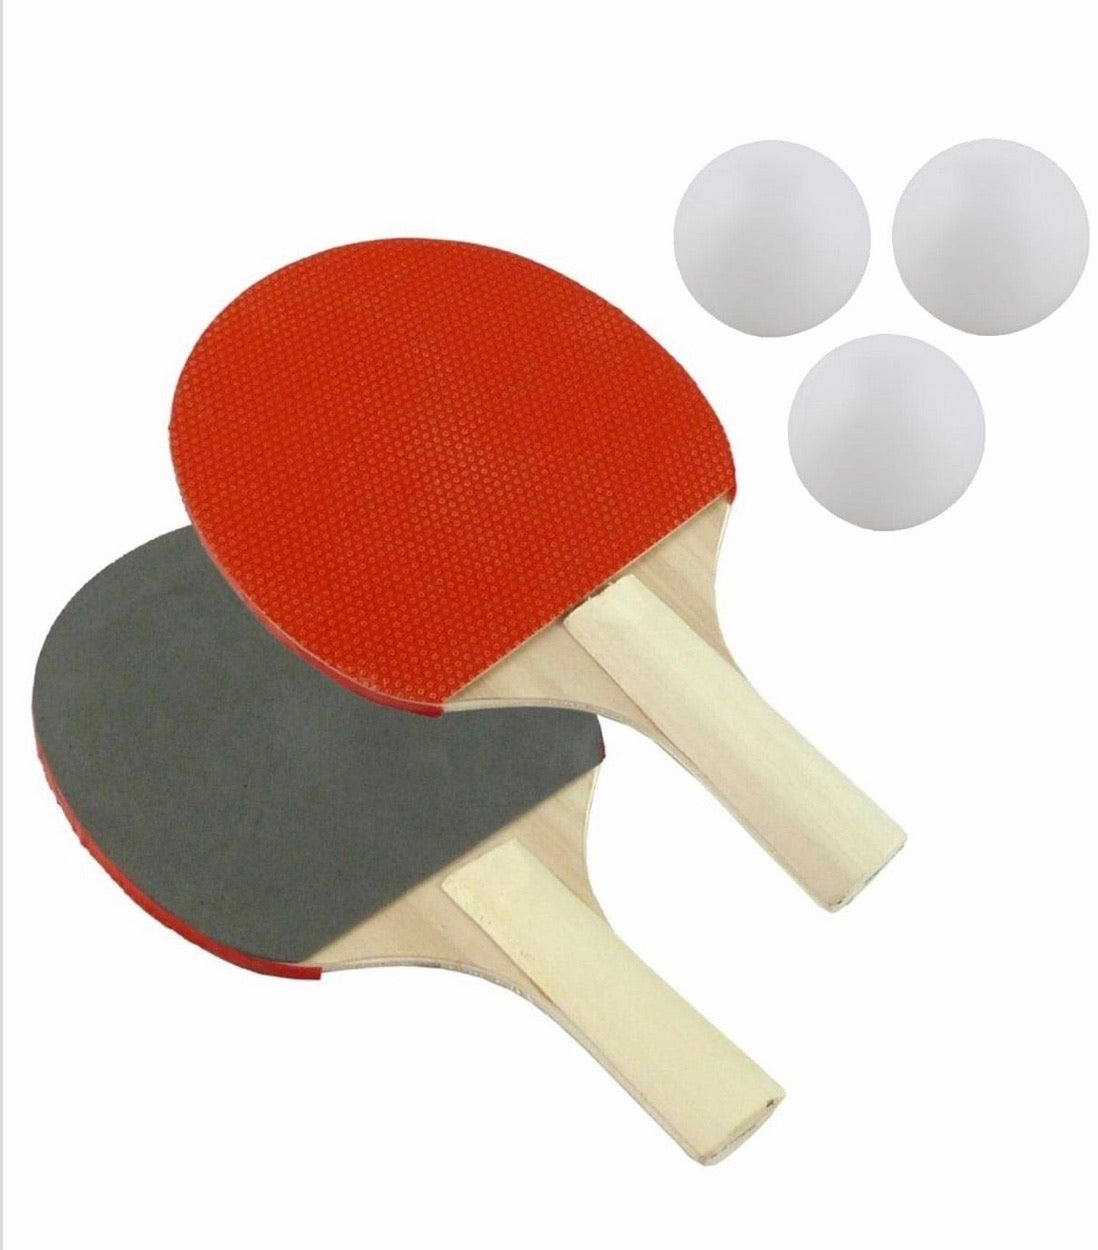 M.Y 2 Player Table Tennis Ping Pong Set